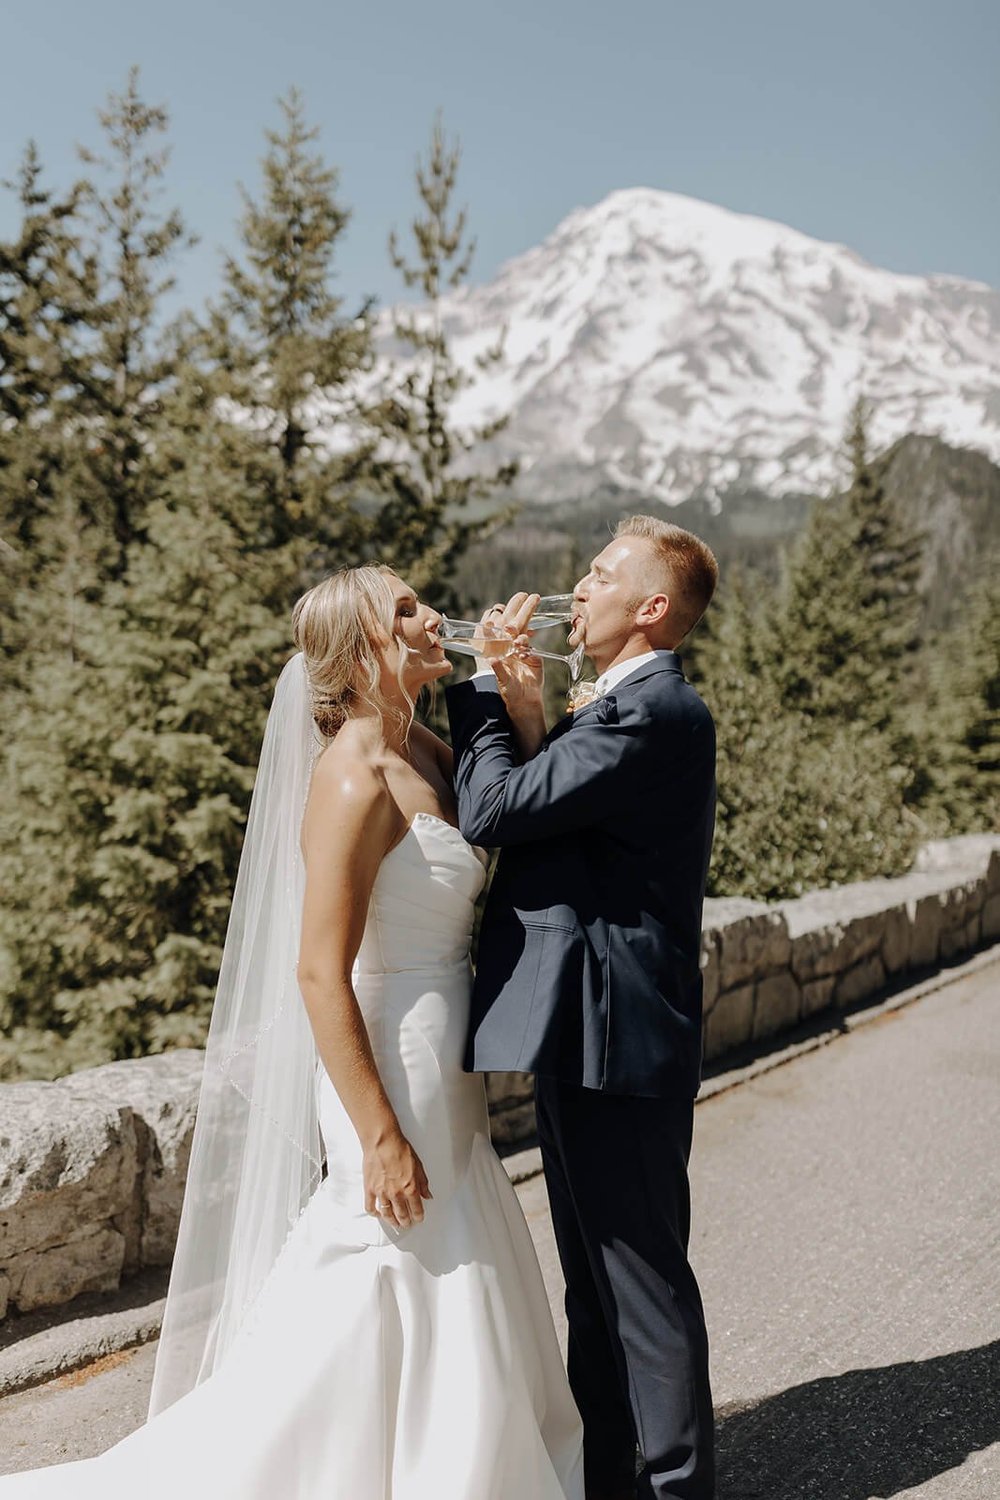 Bride and groom drink champagne together at Mount Rainier wedding